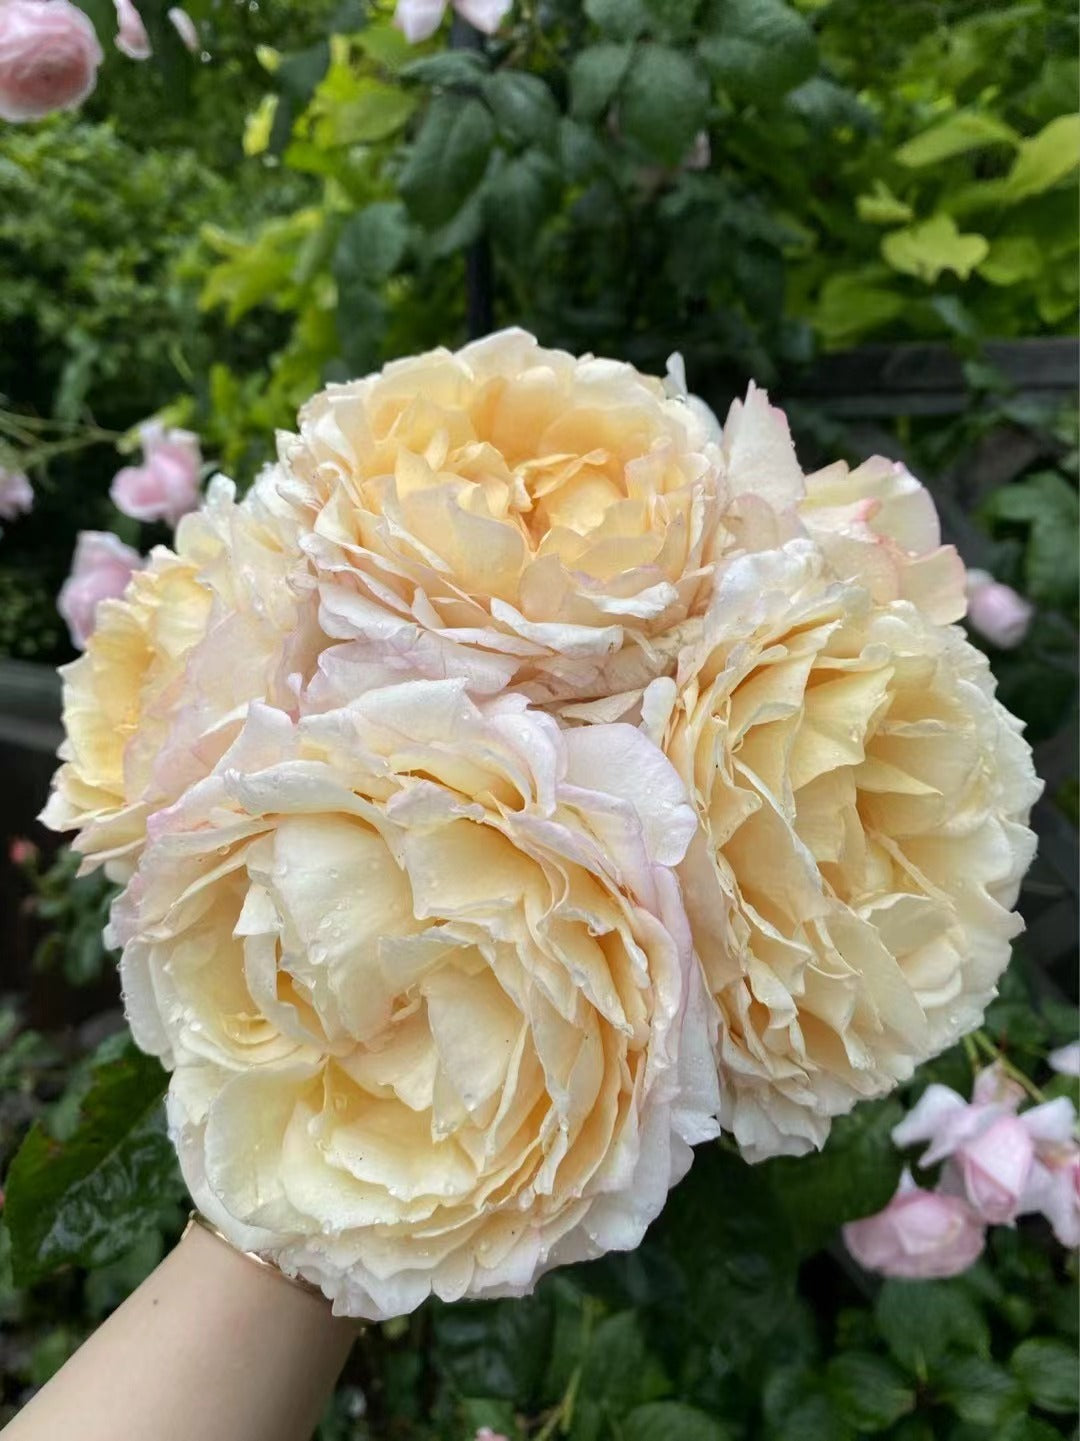 Yves Rose[Gold Yves Piaget]- 3 Gallon++ OwnRoot Live Plant| Ruffle lace| 伊芙金伯爵| Long flowering period| Easy to Grow|Intense Fragrance